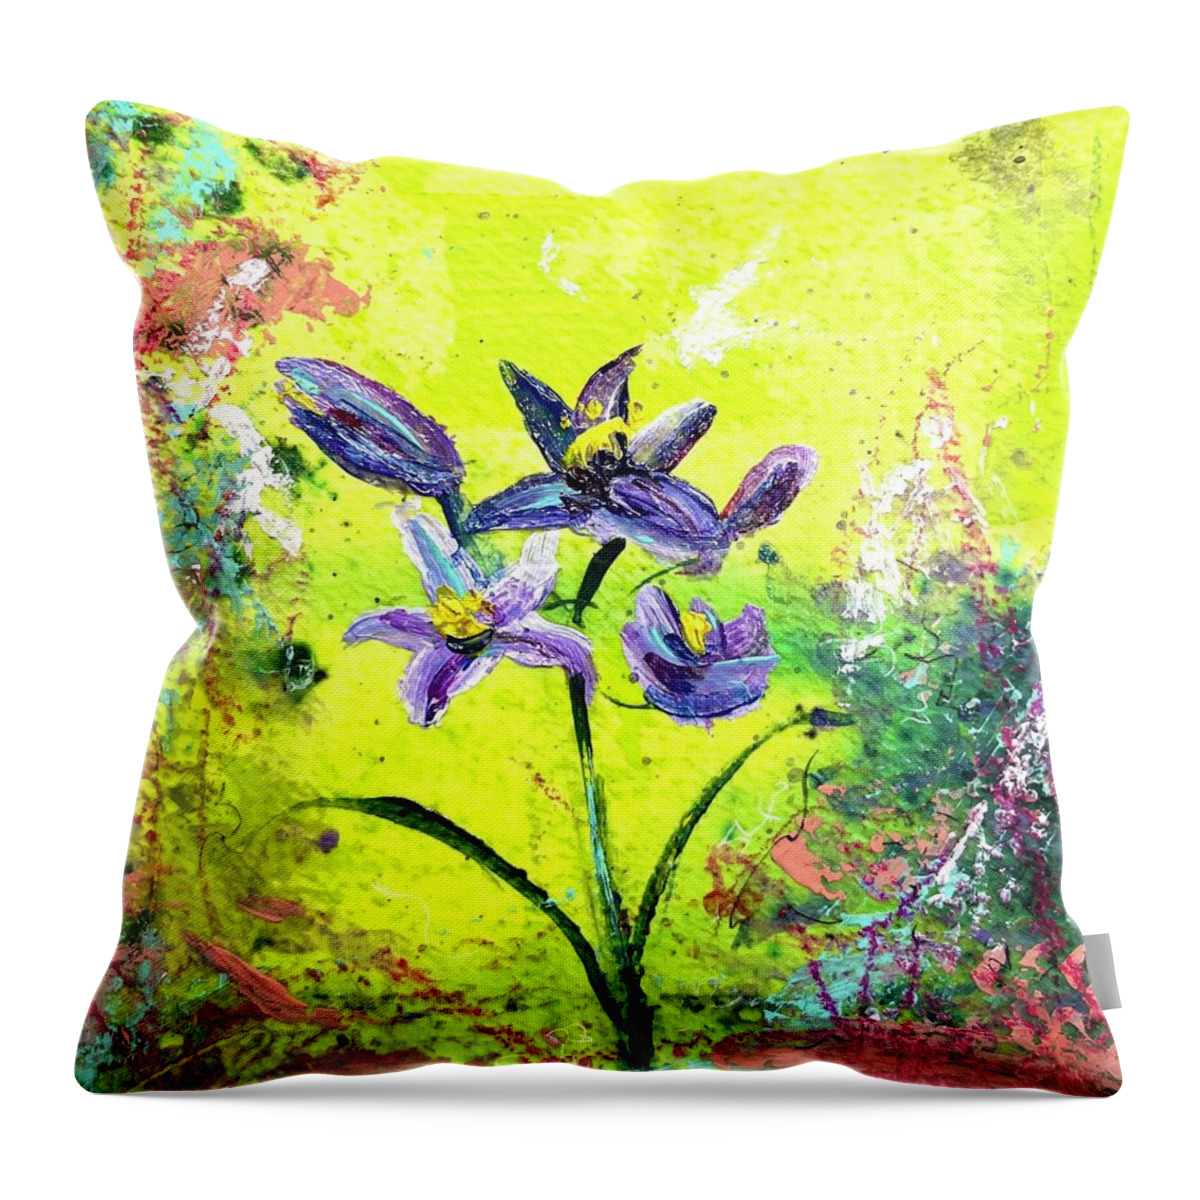 Blue Dick Throw Pillow featuring the painting Wild Thing - Blue Dick by Cheryl Prather